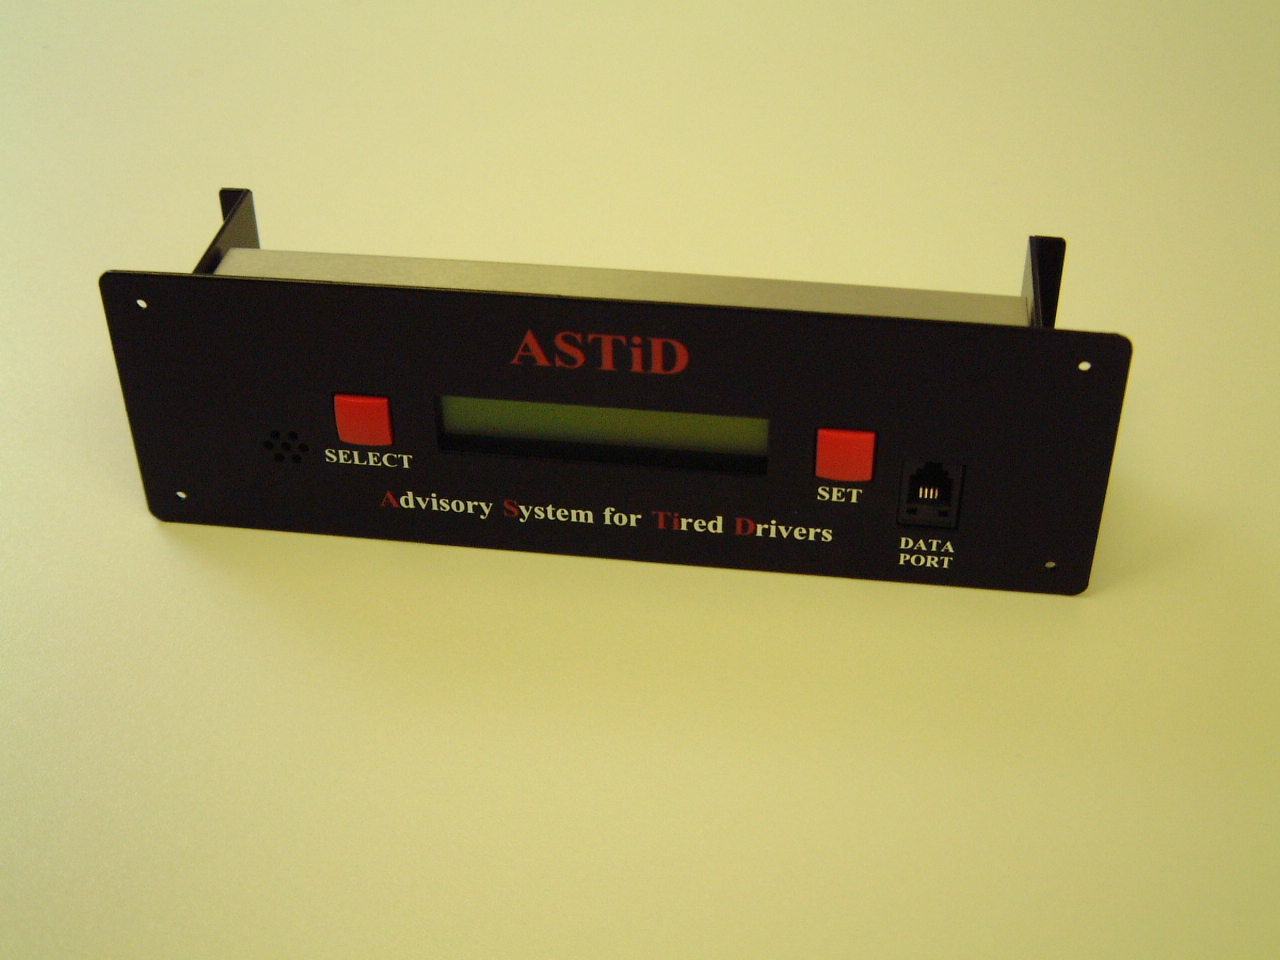 ASTID ADVISORY SYSTEM FOR TIRED DRIVERS INSTALLATION SET UP